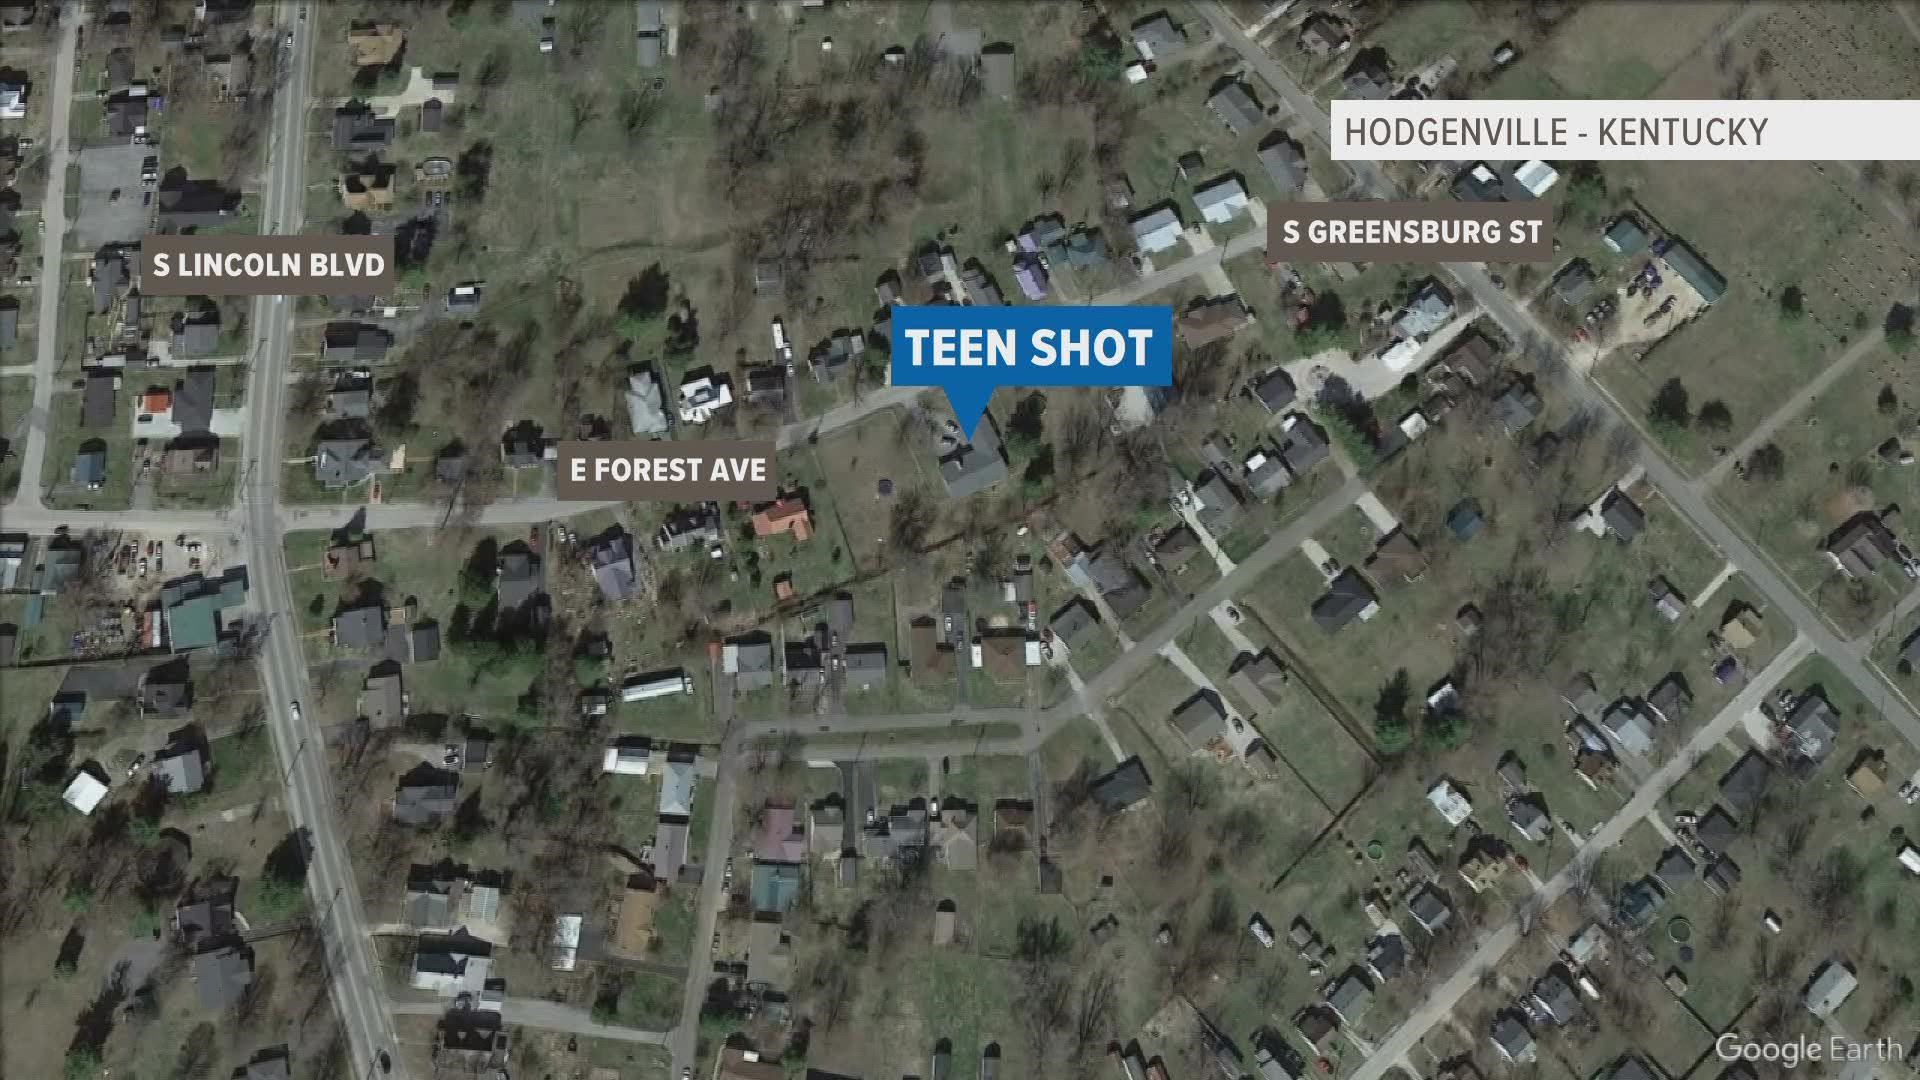 KSP say a 17-year-old boy and a 15-year-old got into a fight, which resulted in the 17-year-old getting shot.